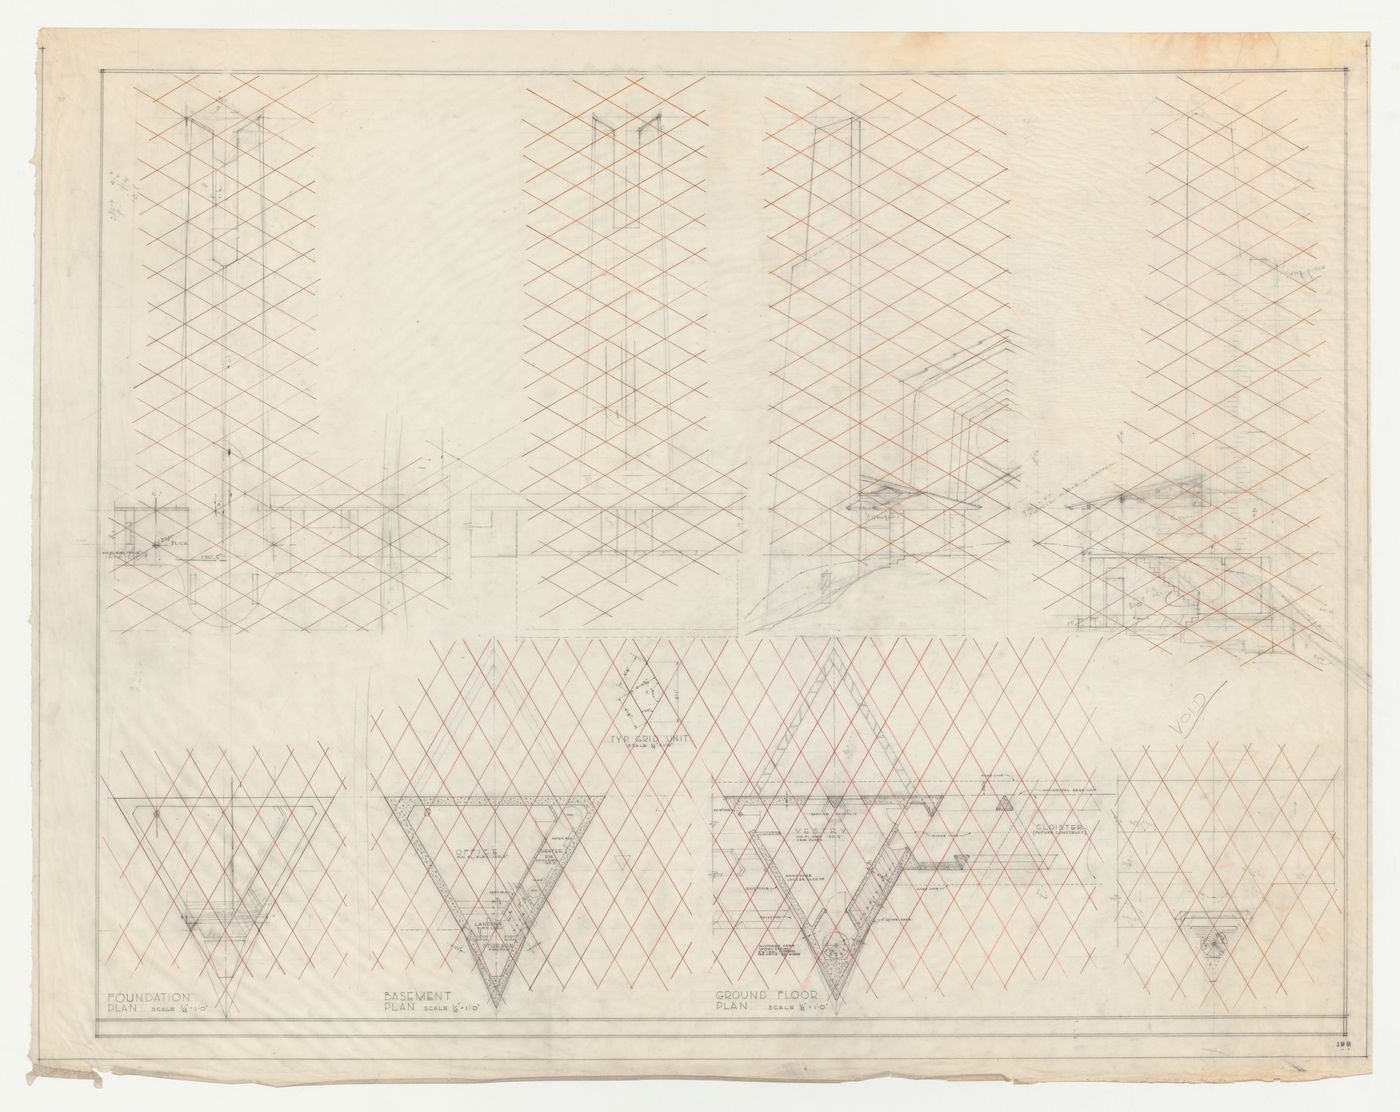 Wayfarers' Chapel, Palos Verdes, California: Elevations, section and plans for the chapel and campanile developed on an equilateral parallelogram grid